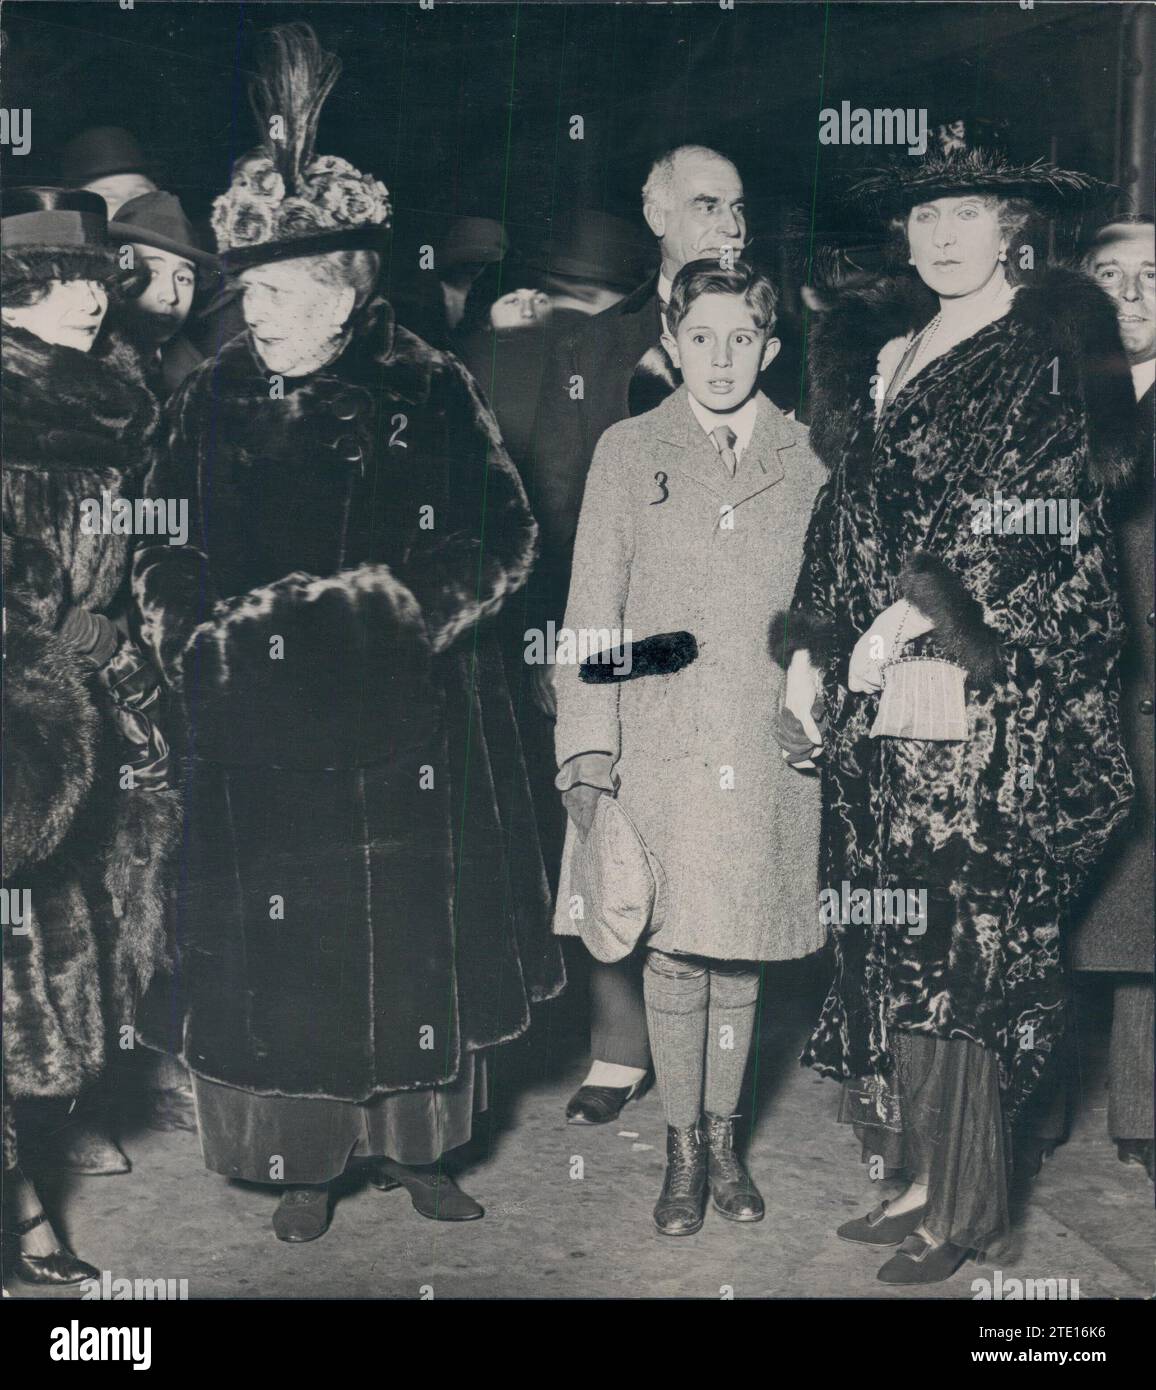 10/31/1919. The royal family in London. HM Queen Victoria (1), with her Son, Infant D. Jaime (3), and her Mother, Princess Beatrice (2). Credit: Album / Archivo ABC / Louis Hugelmann Stock Photo